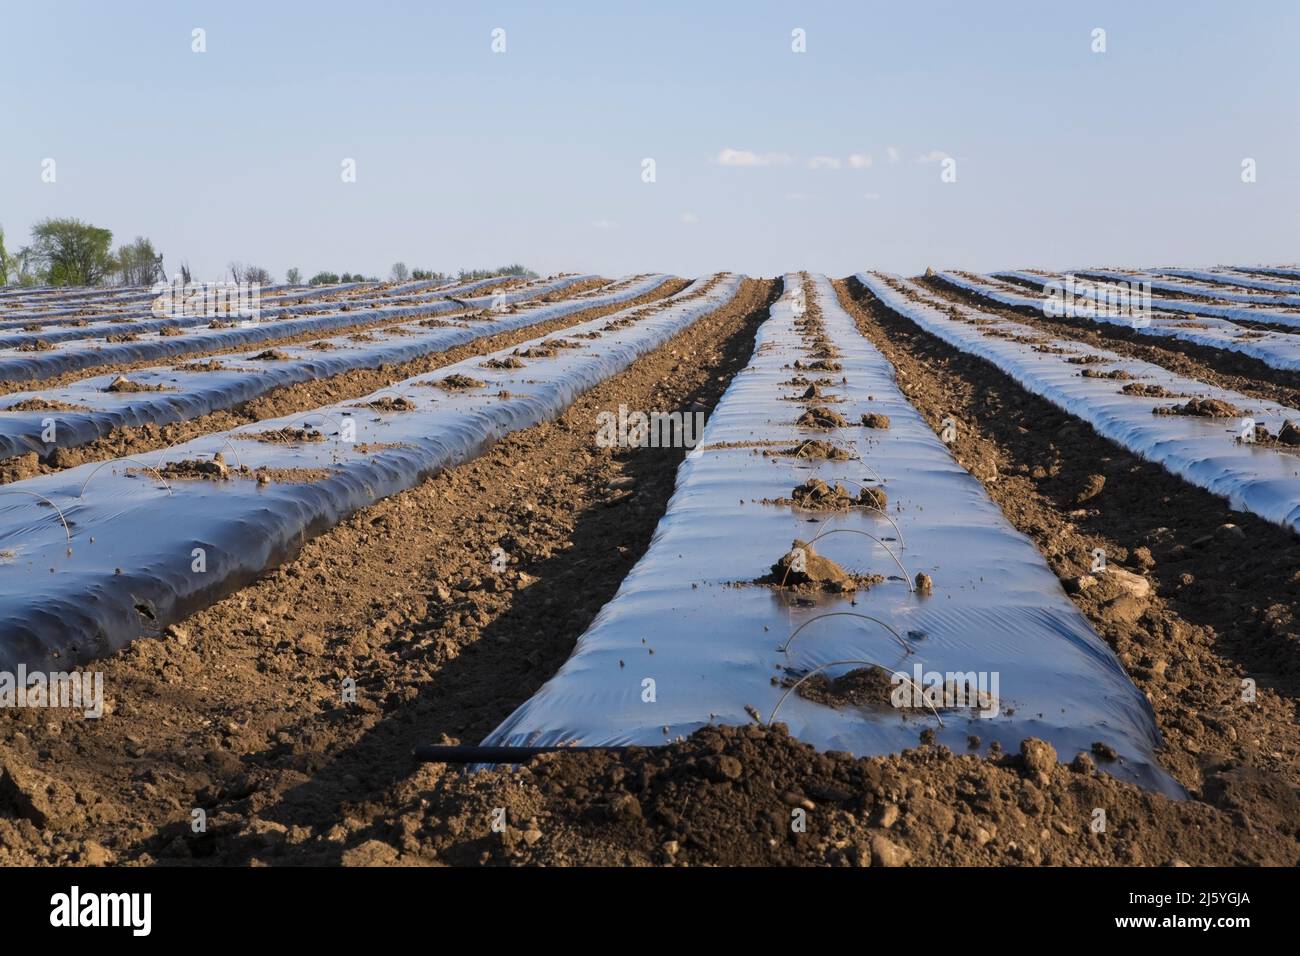 Agricultural field covered with protective sheeting to prevent frost damage to newly planted crops in spring. Stock Photo